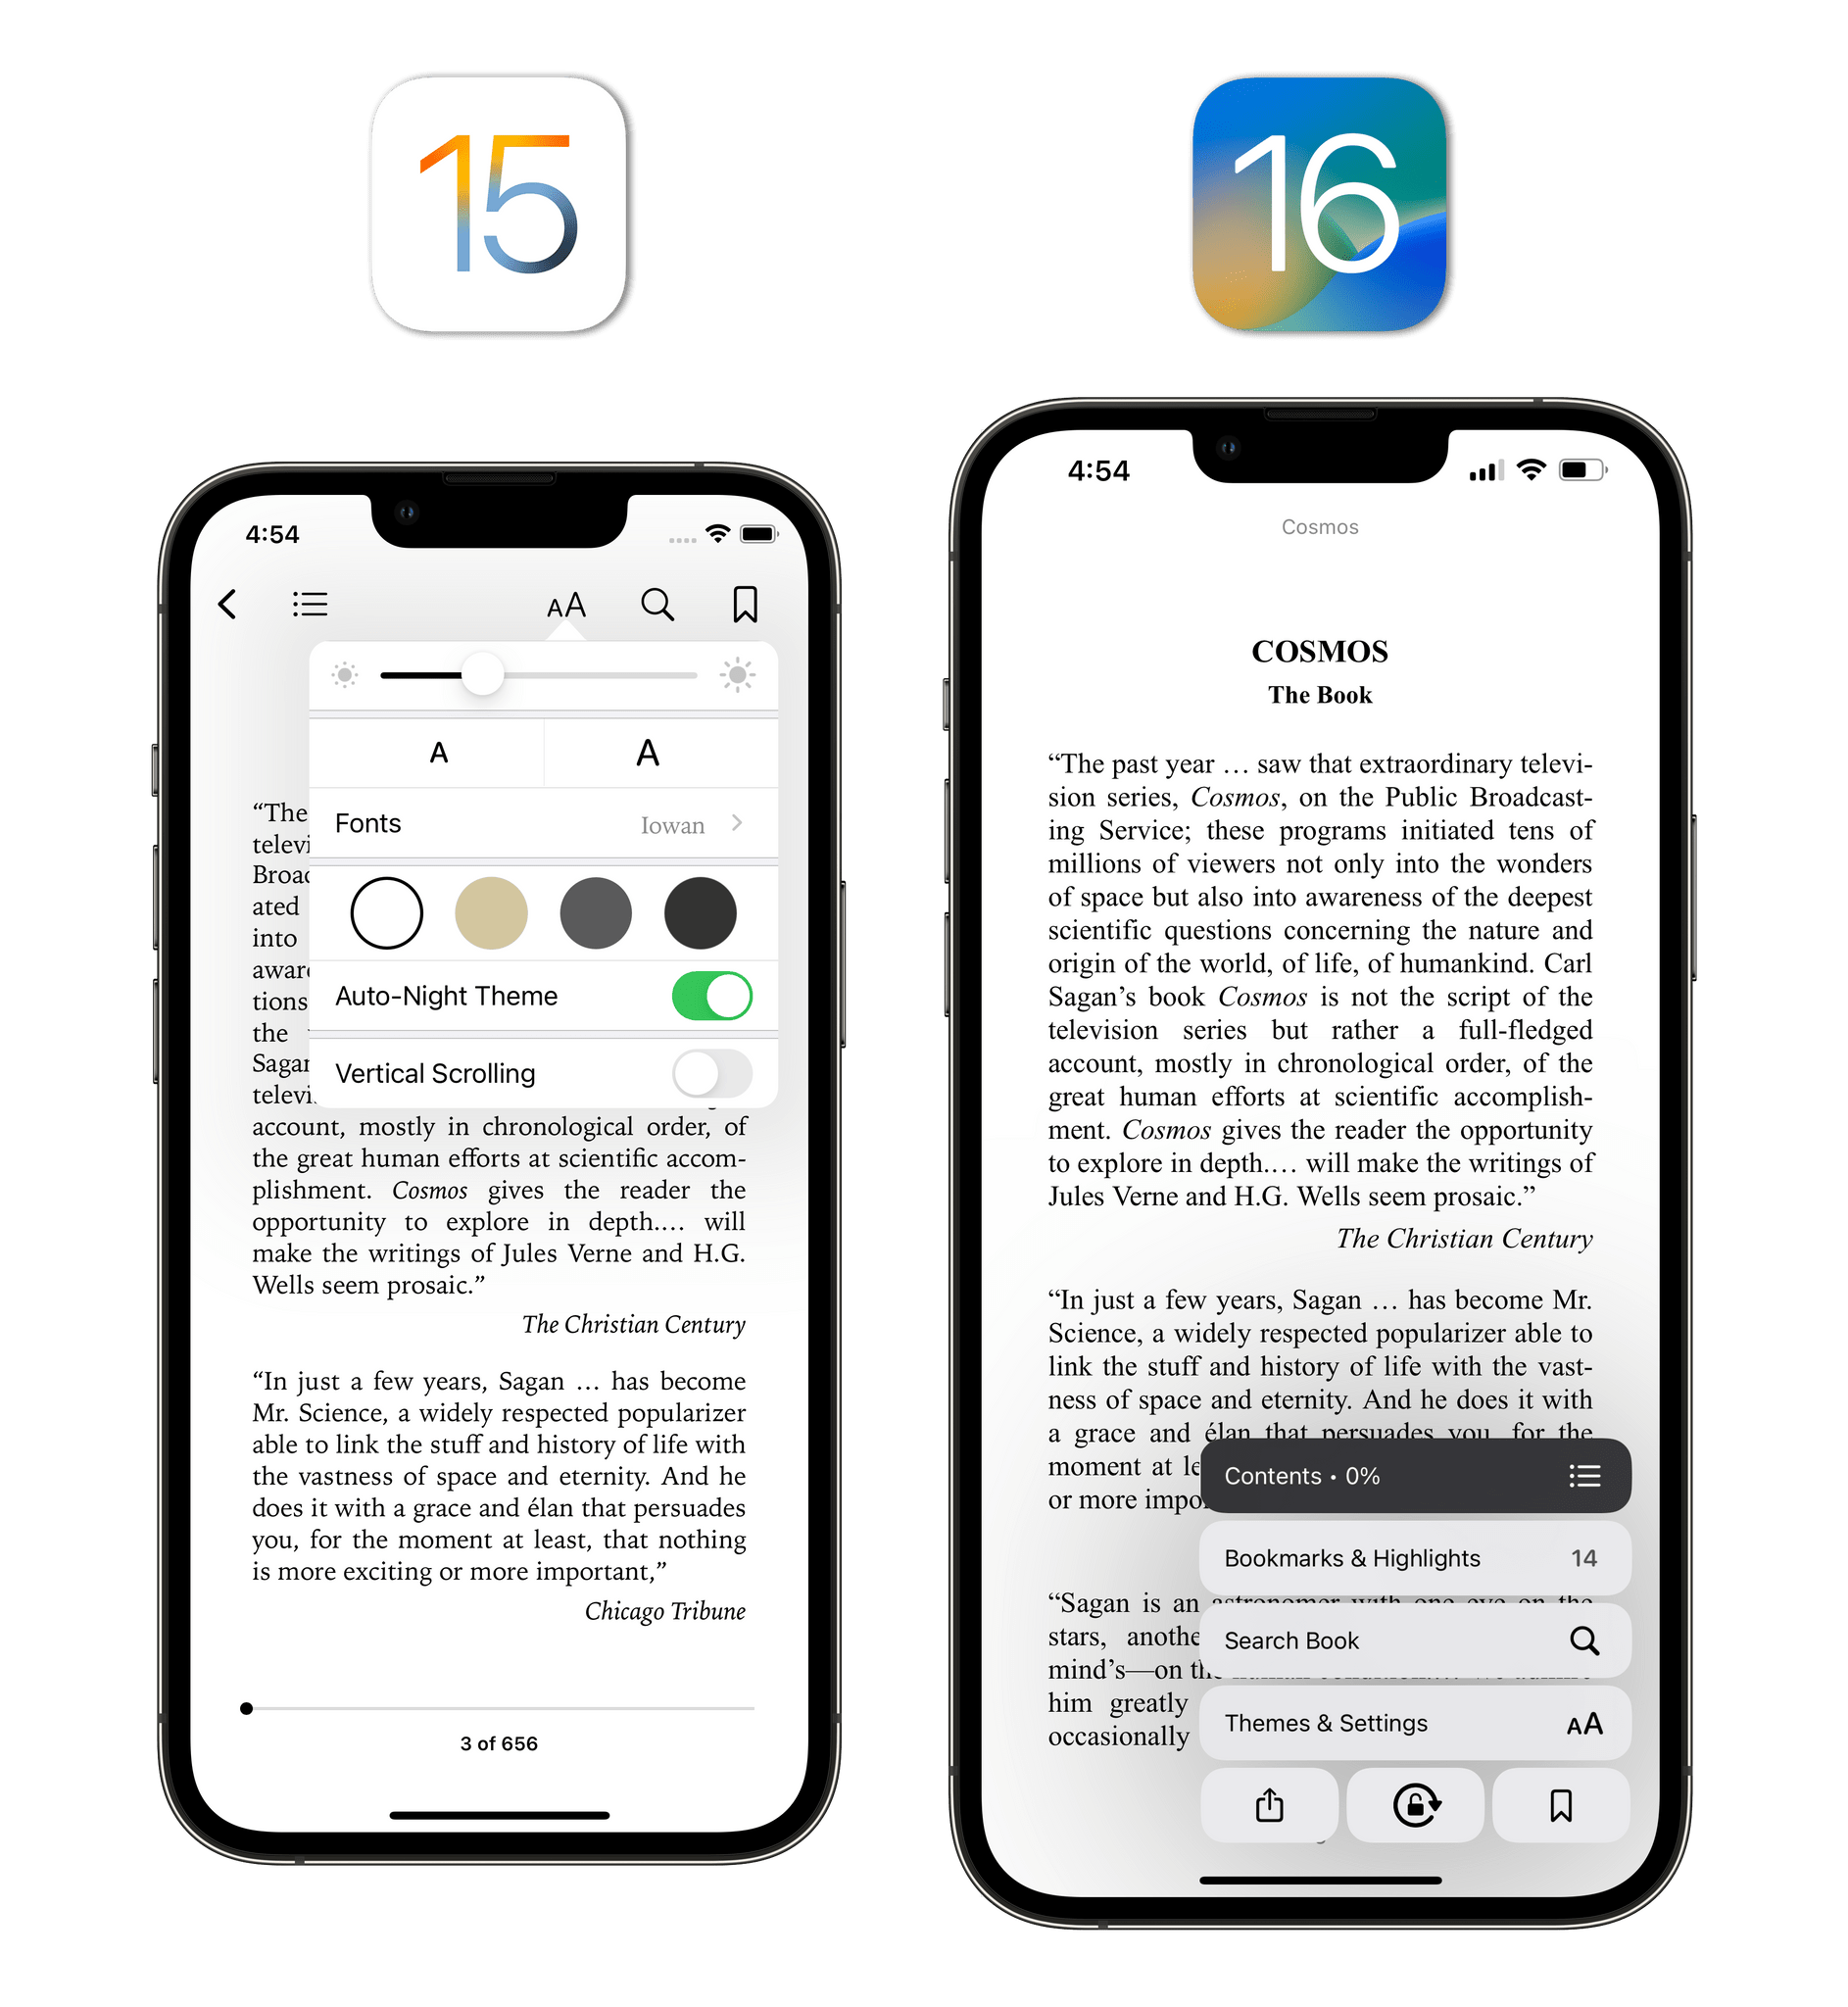 The new reader UI in iOS 16.